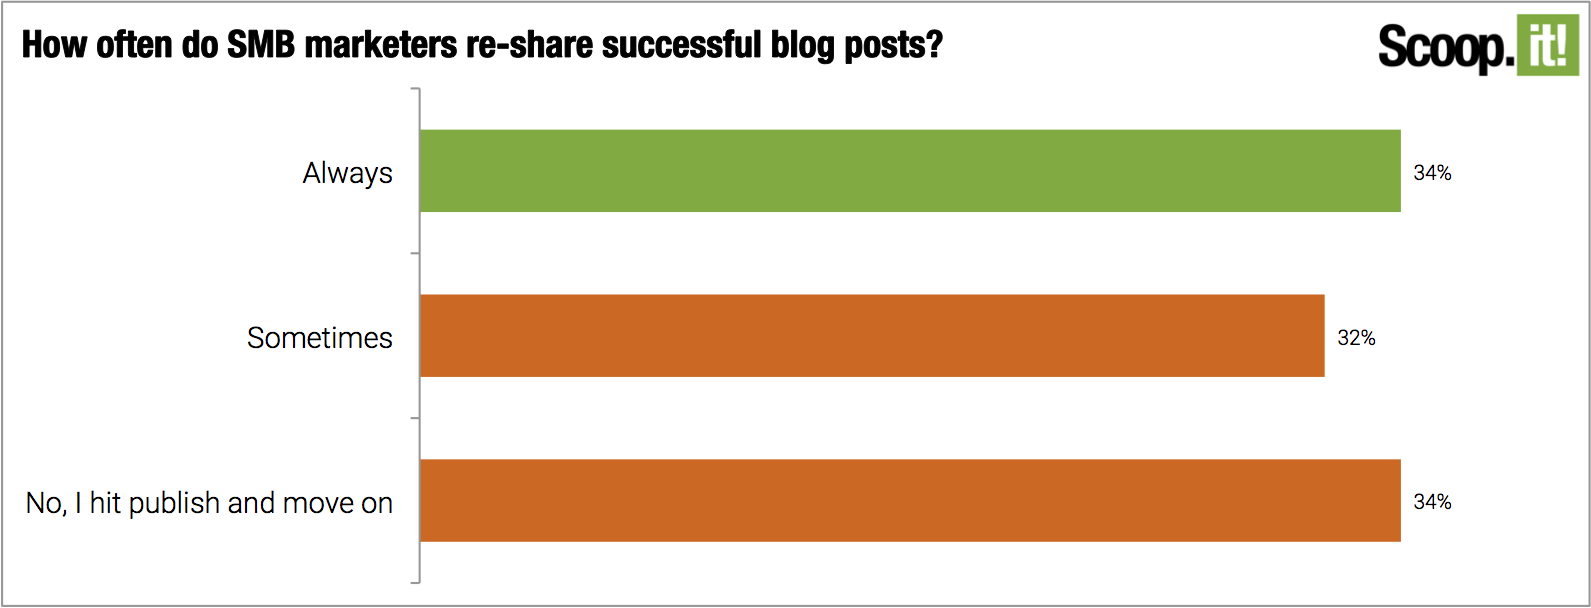 Only about 35% of marketers always reshare their blog posts